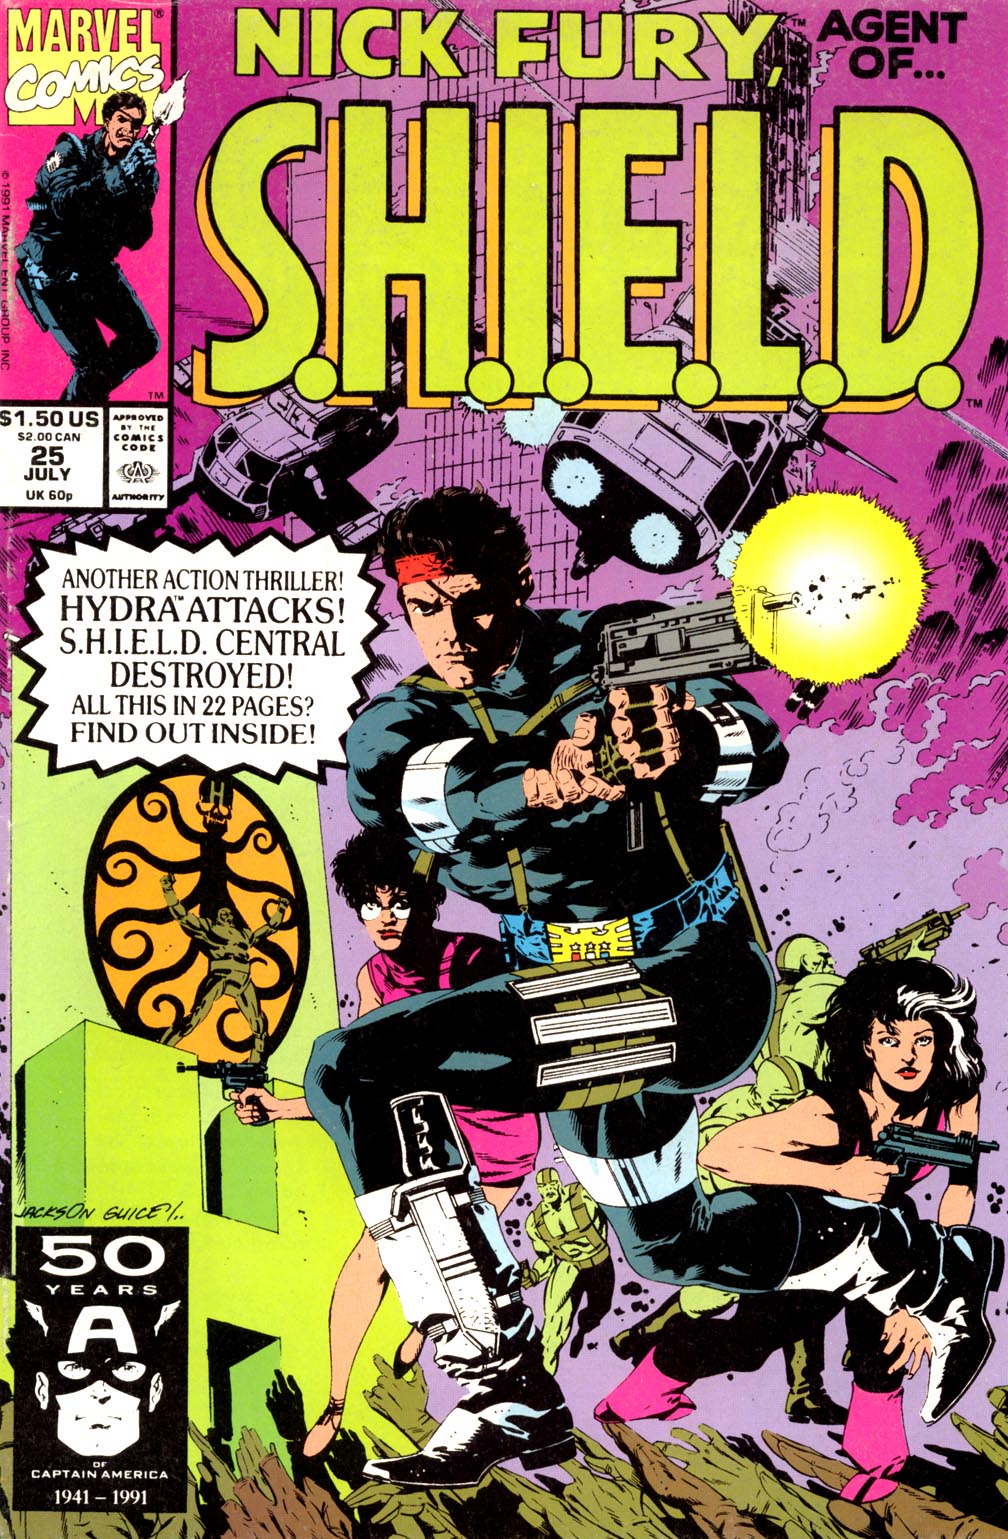 Read online Nick Fury, Agent of S.H.I.E.L.D. comic -  Issue #25 - 1